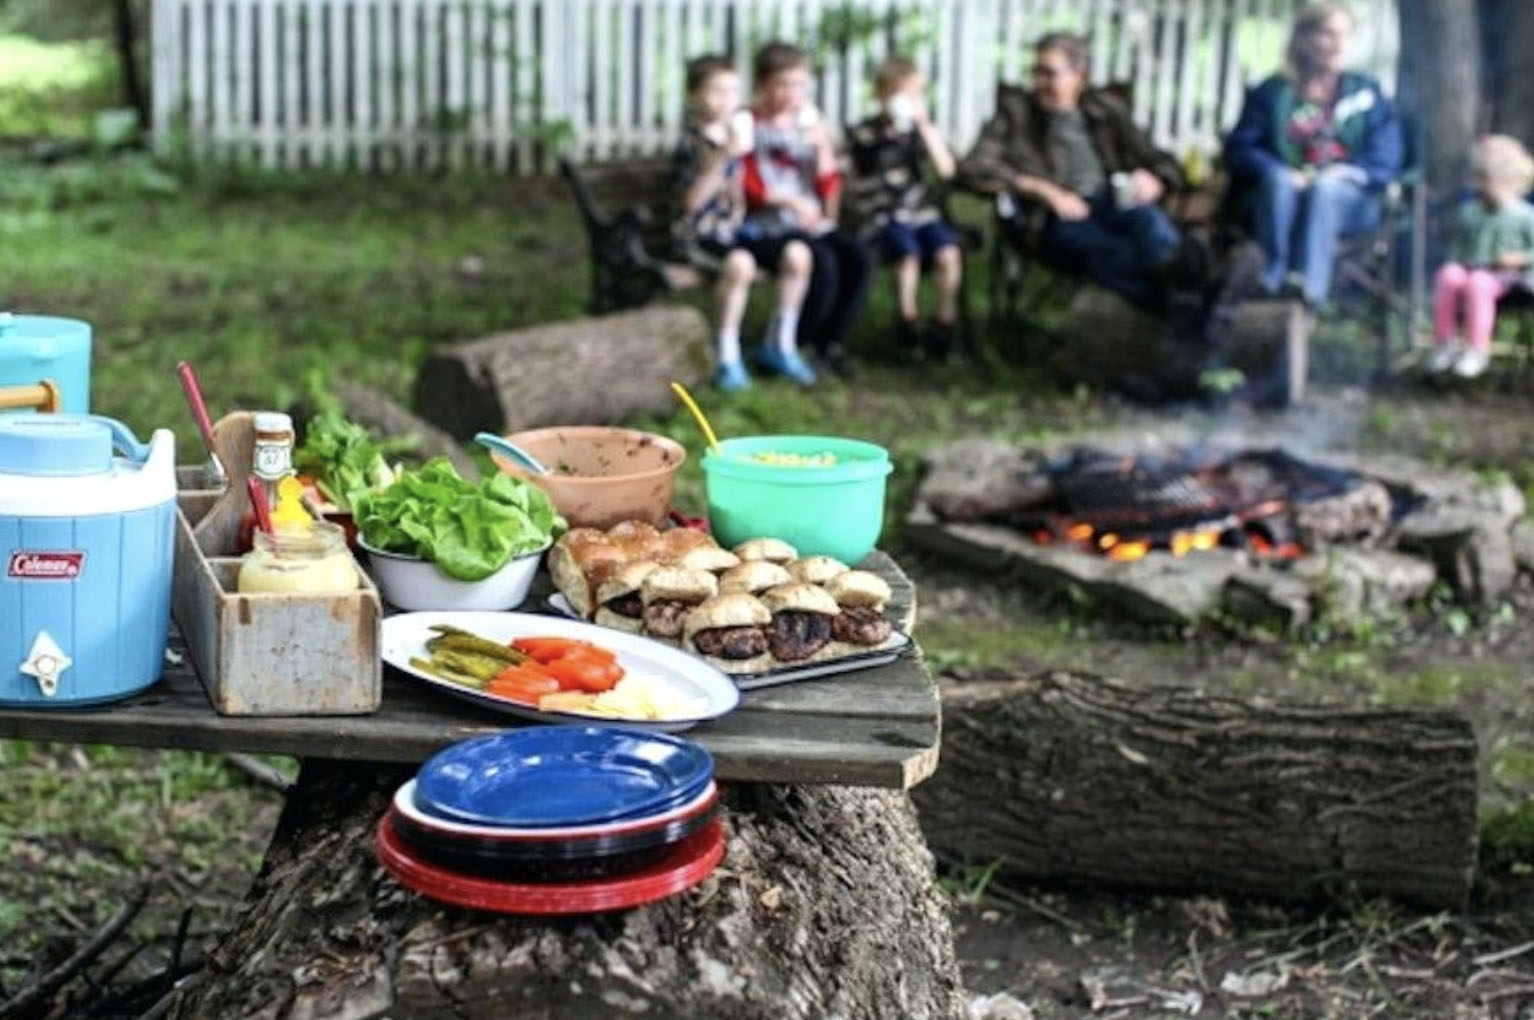 https://highcountryconservation.org/wp-content/uploads/2022/01/cooking-outside.jpg